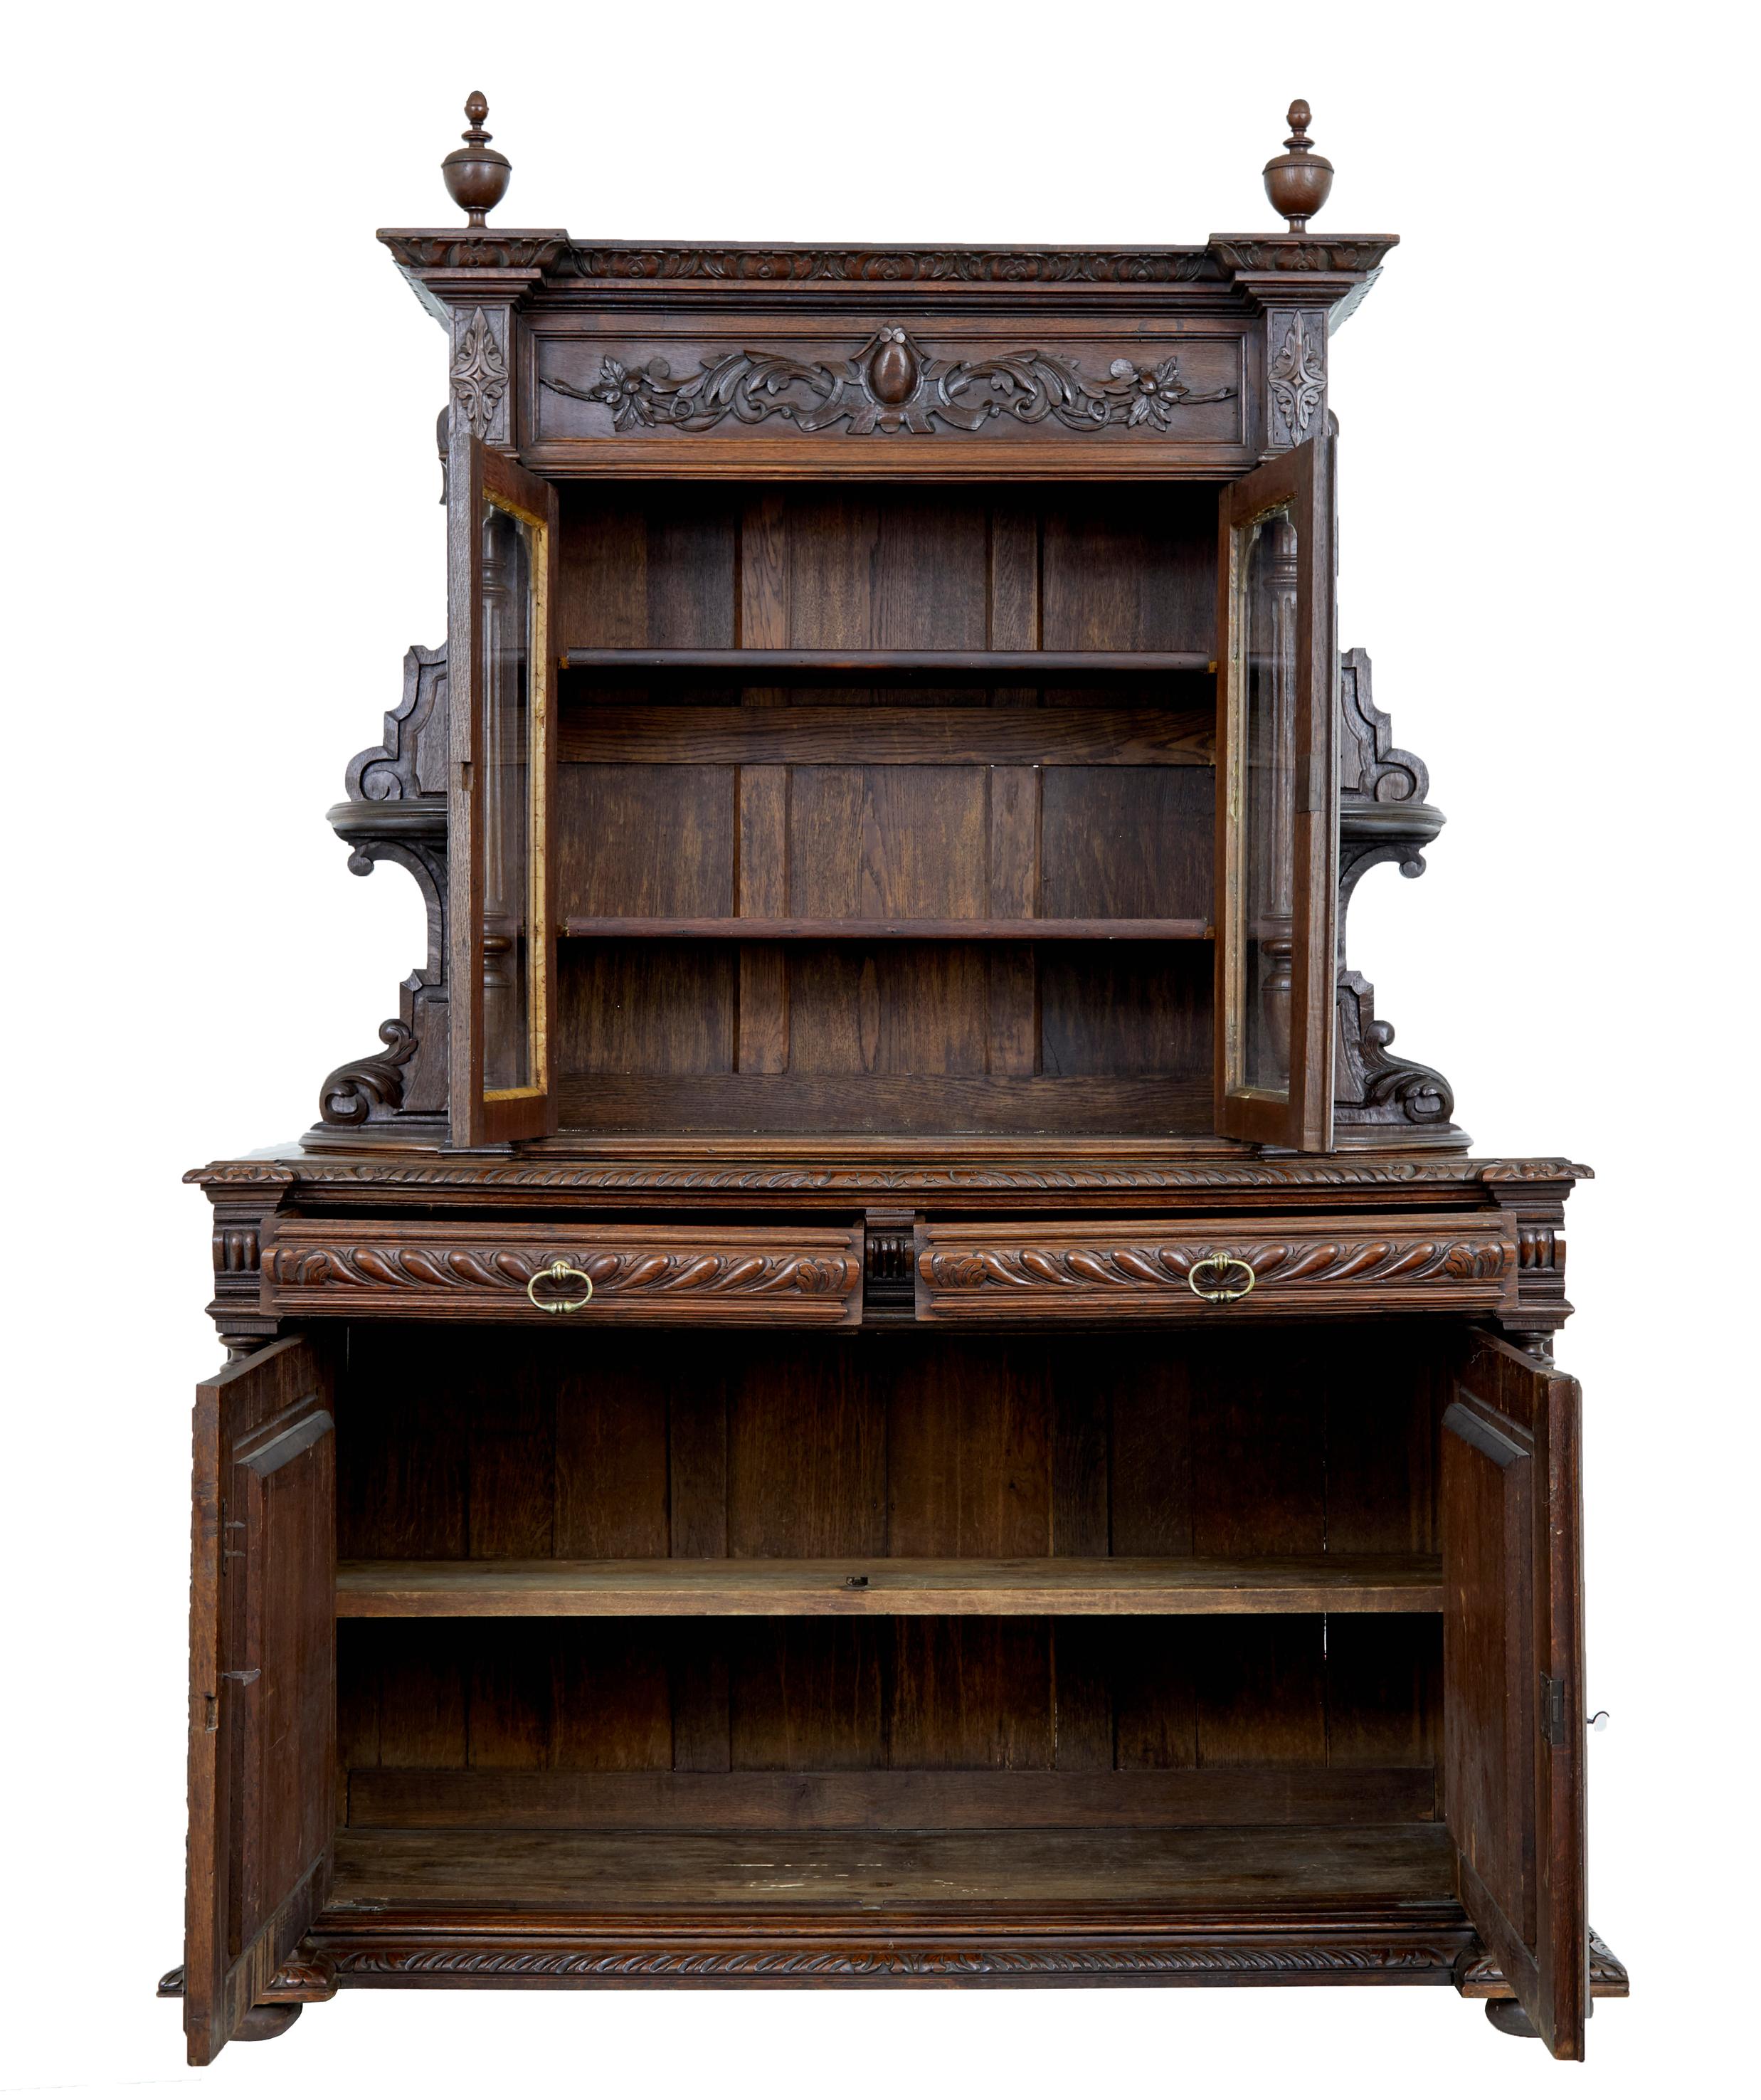 2 part oak dresser circa 1880.

Top section with heavily carved cornice with central cartouche and turned finials. Glazed double doors open to reveal 2 shelves, flanked either side by turned columns and open shelves for display purposes.

Bottom